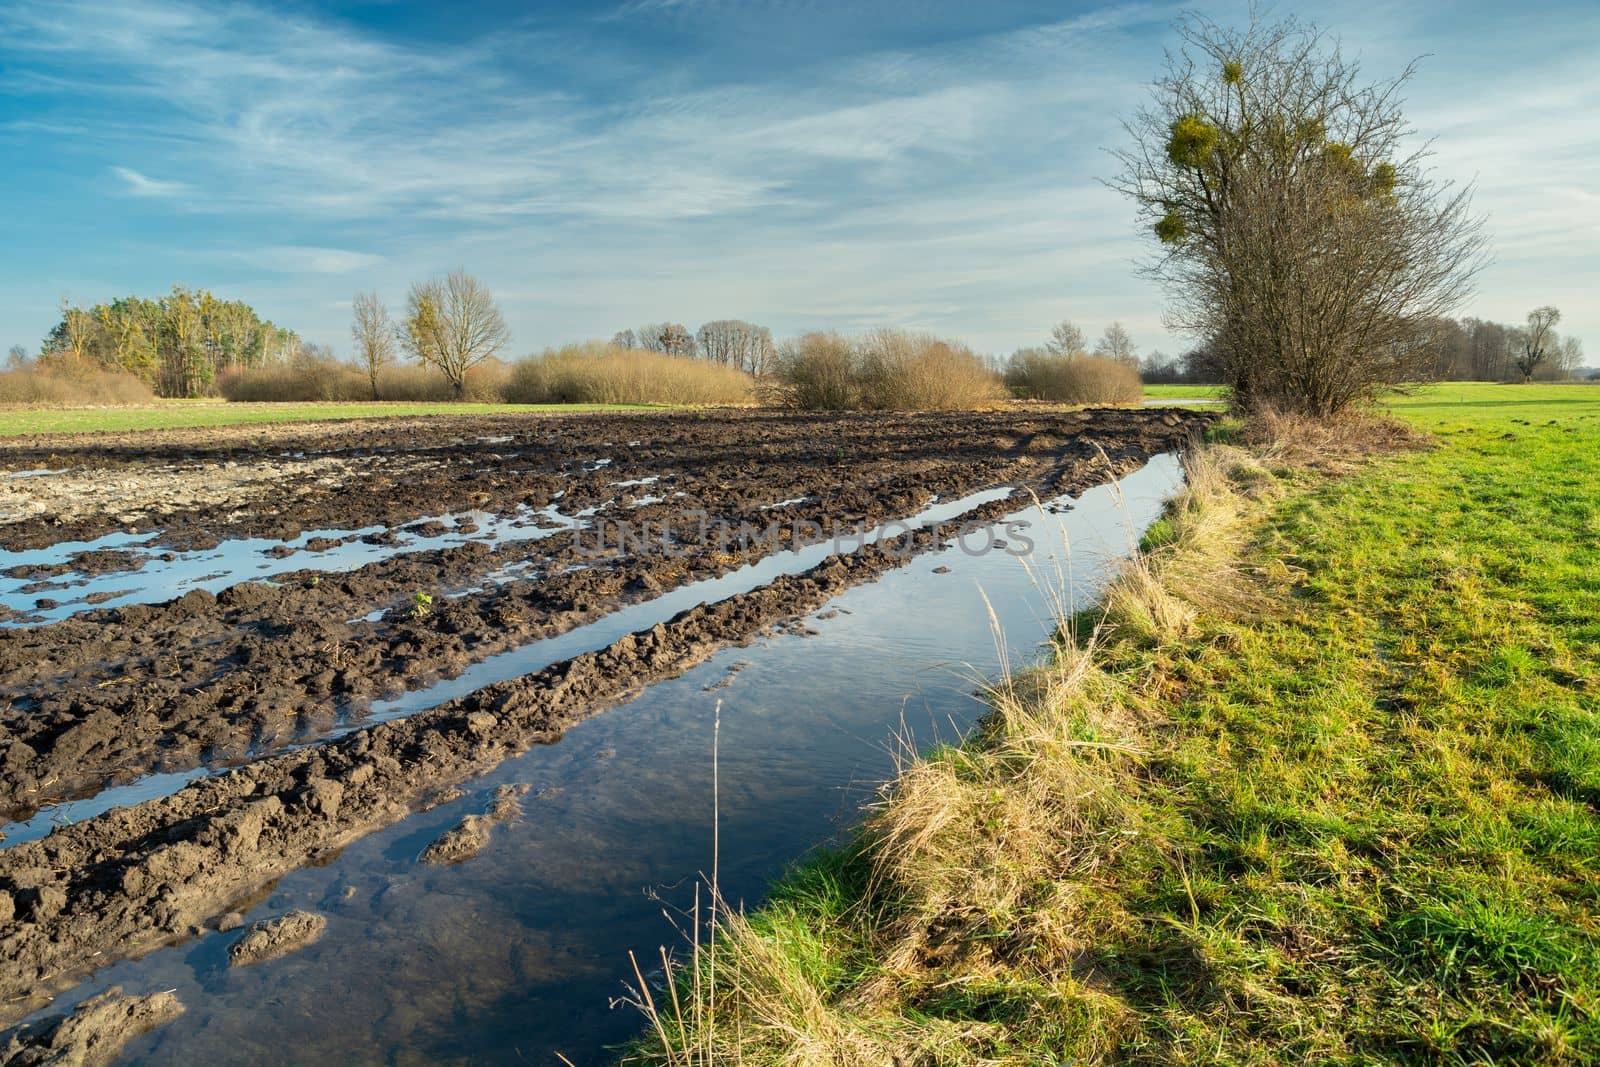 Water after melting snow on a plowed field, Nowiny, Poland by darekb22